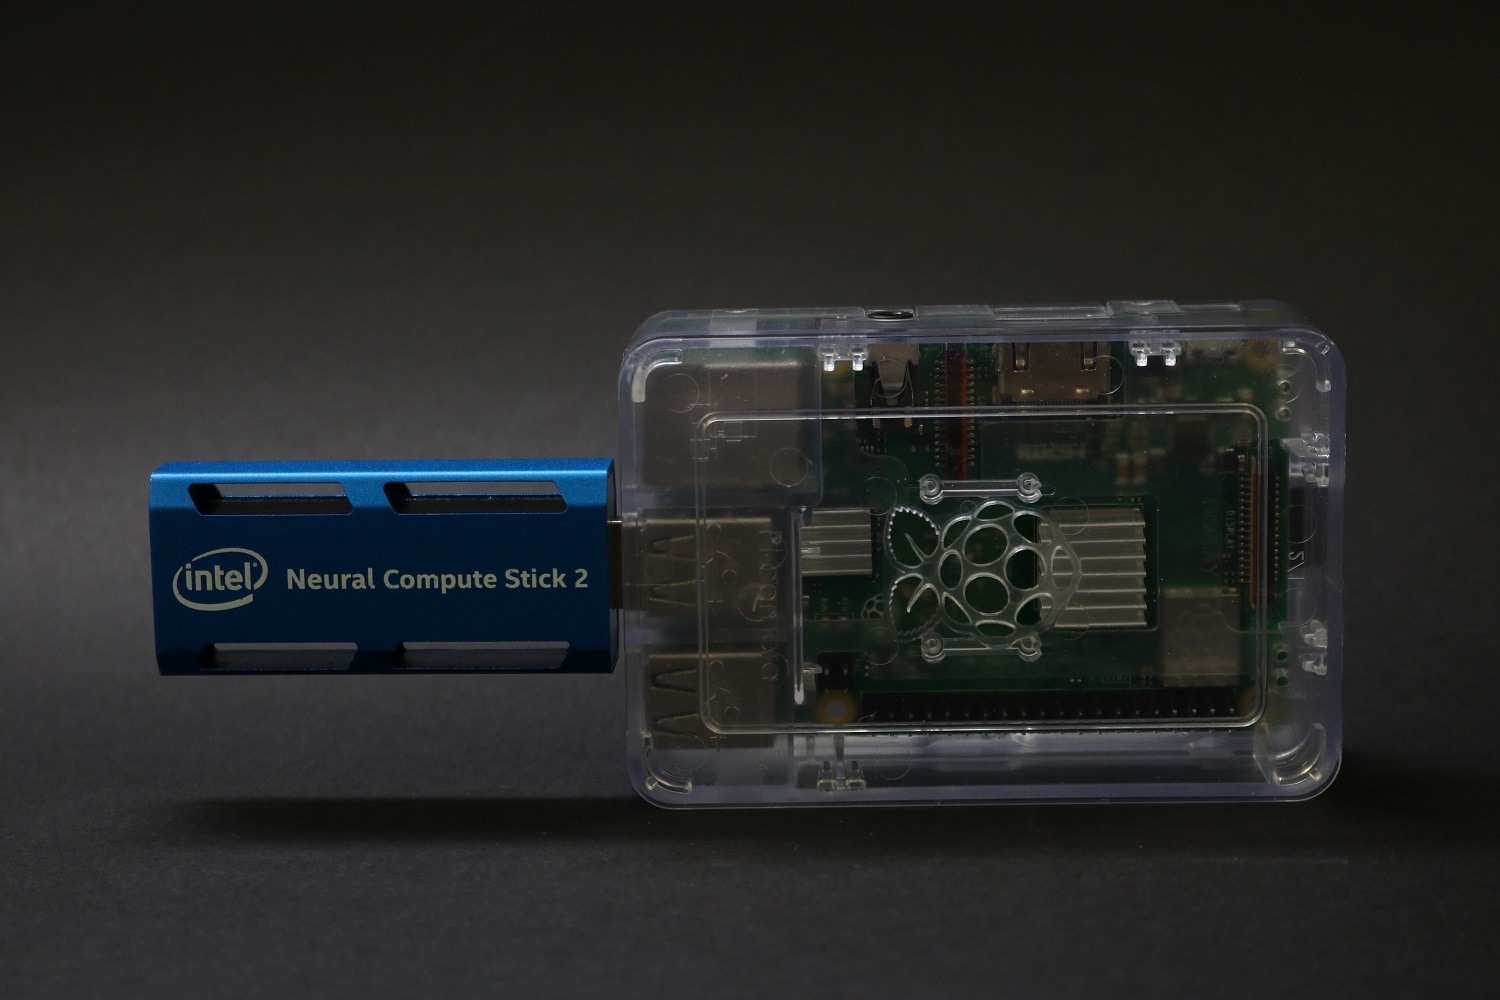 pi3 with ncs 2 and clear case